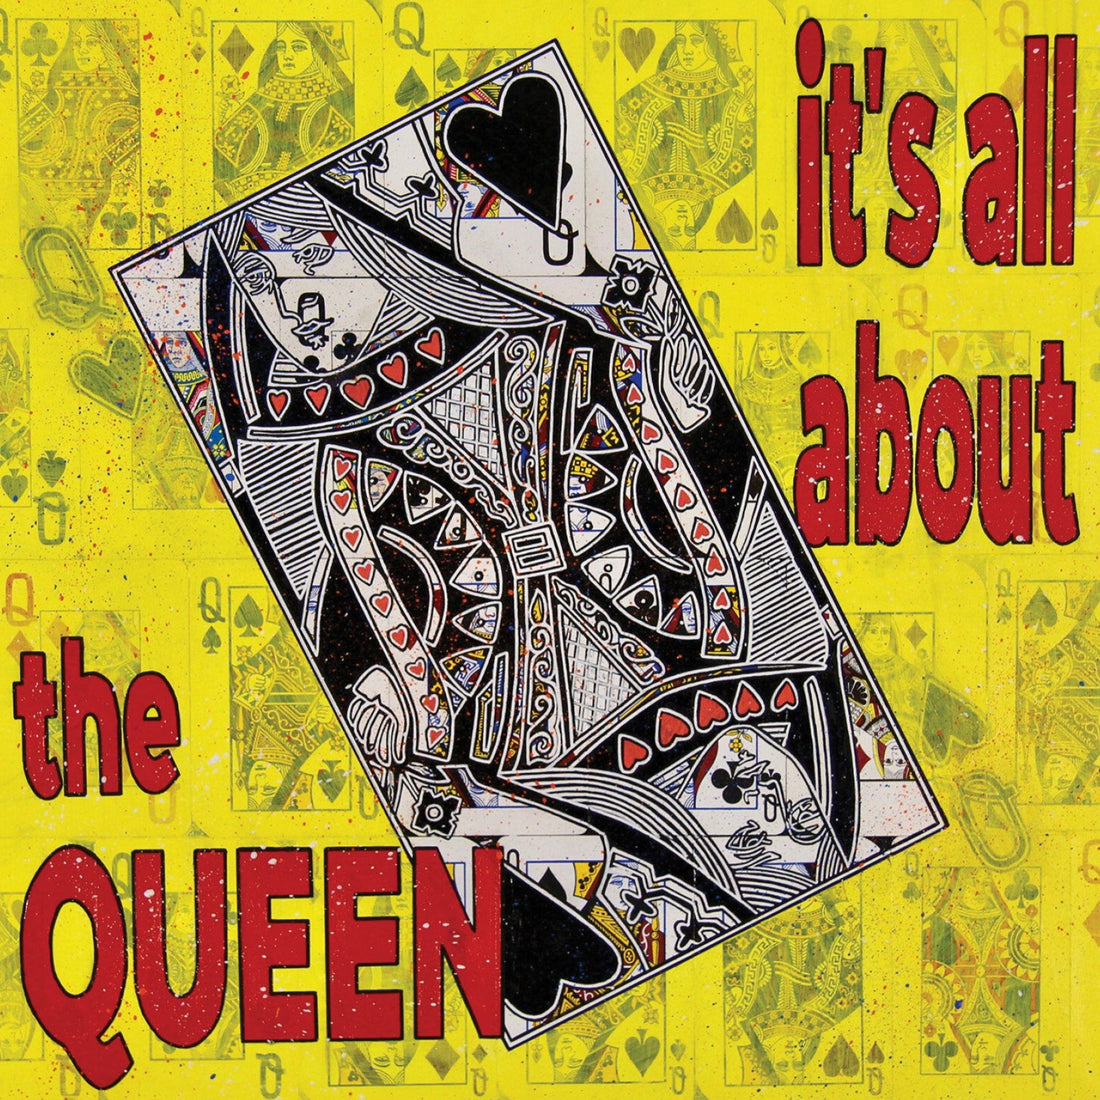 Gail Blima "It's all about the Queen"